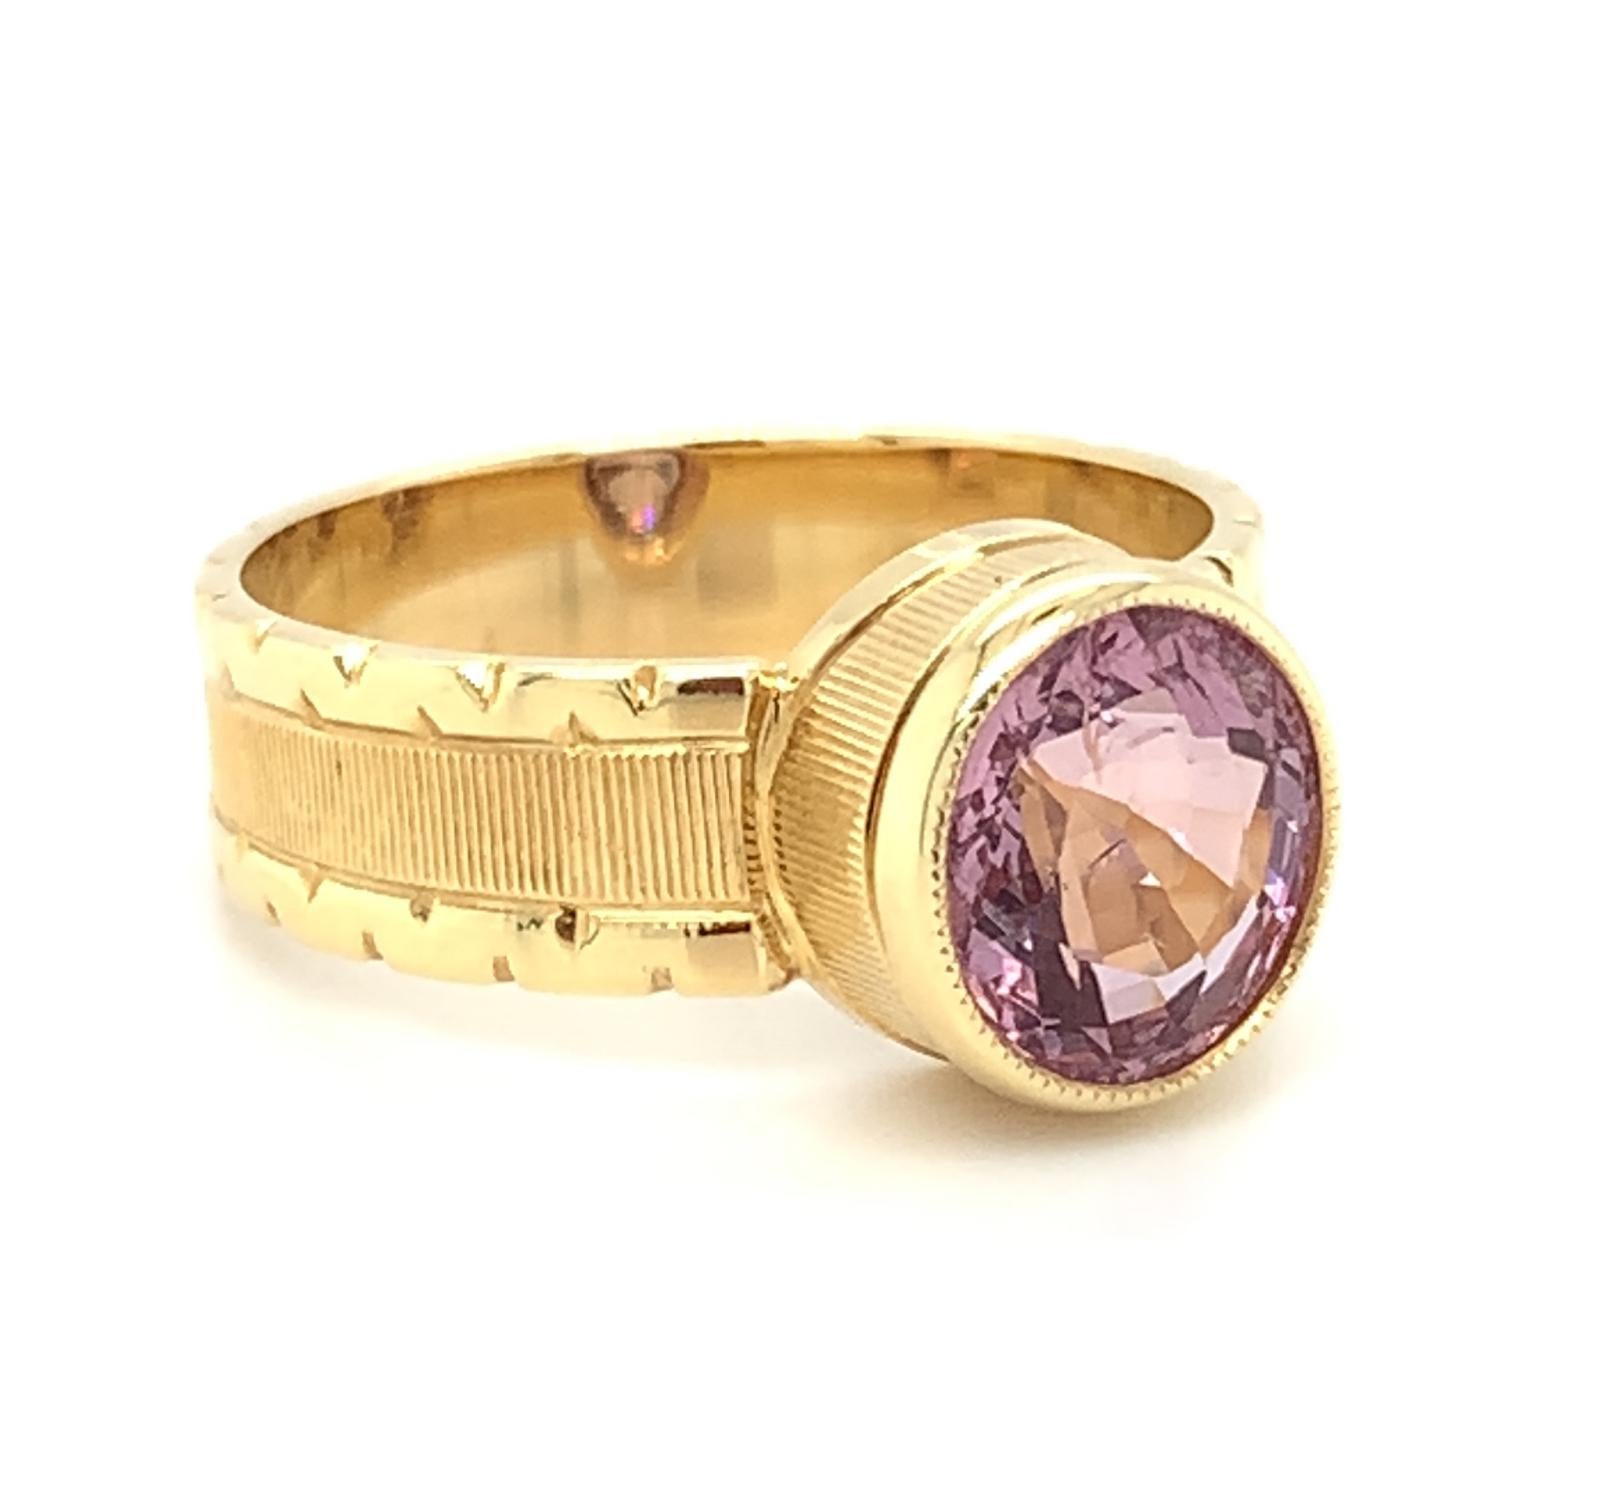 Artisan 2.03 ct. Pink Spinel Band Ring in 18k Yellow Gold   For Sale